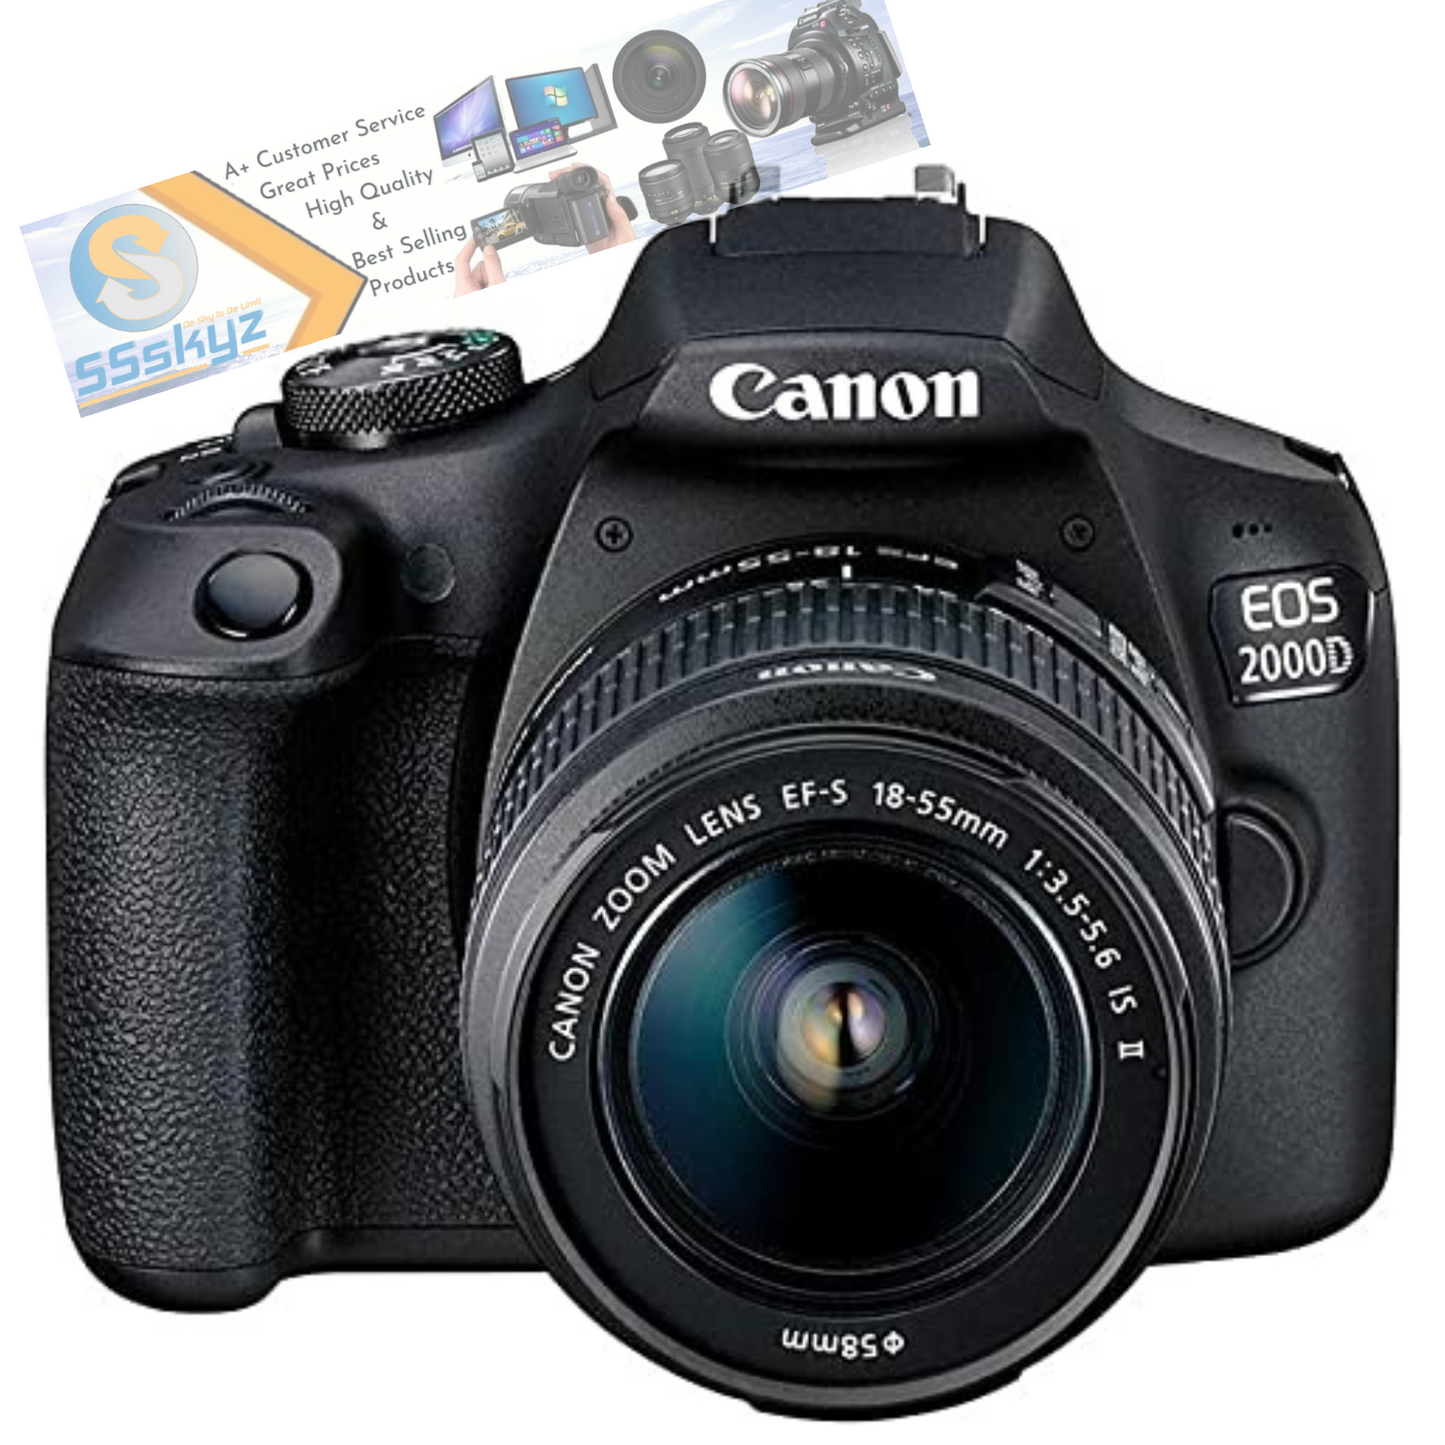 Canon Eos Rebel 2000D / T7 24.1 Mp Digital Slr Camera with 18-55mm Lens